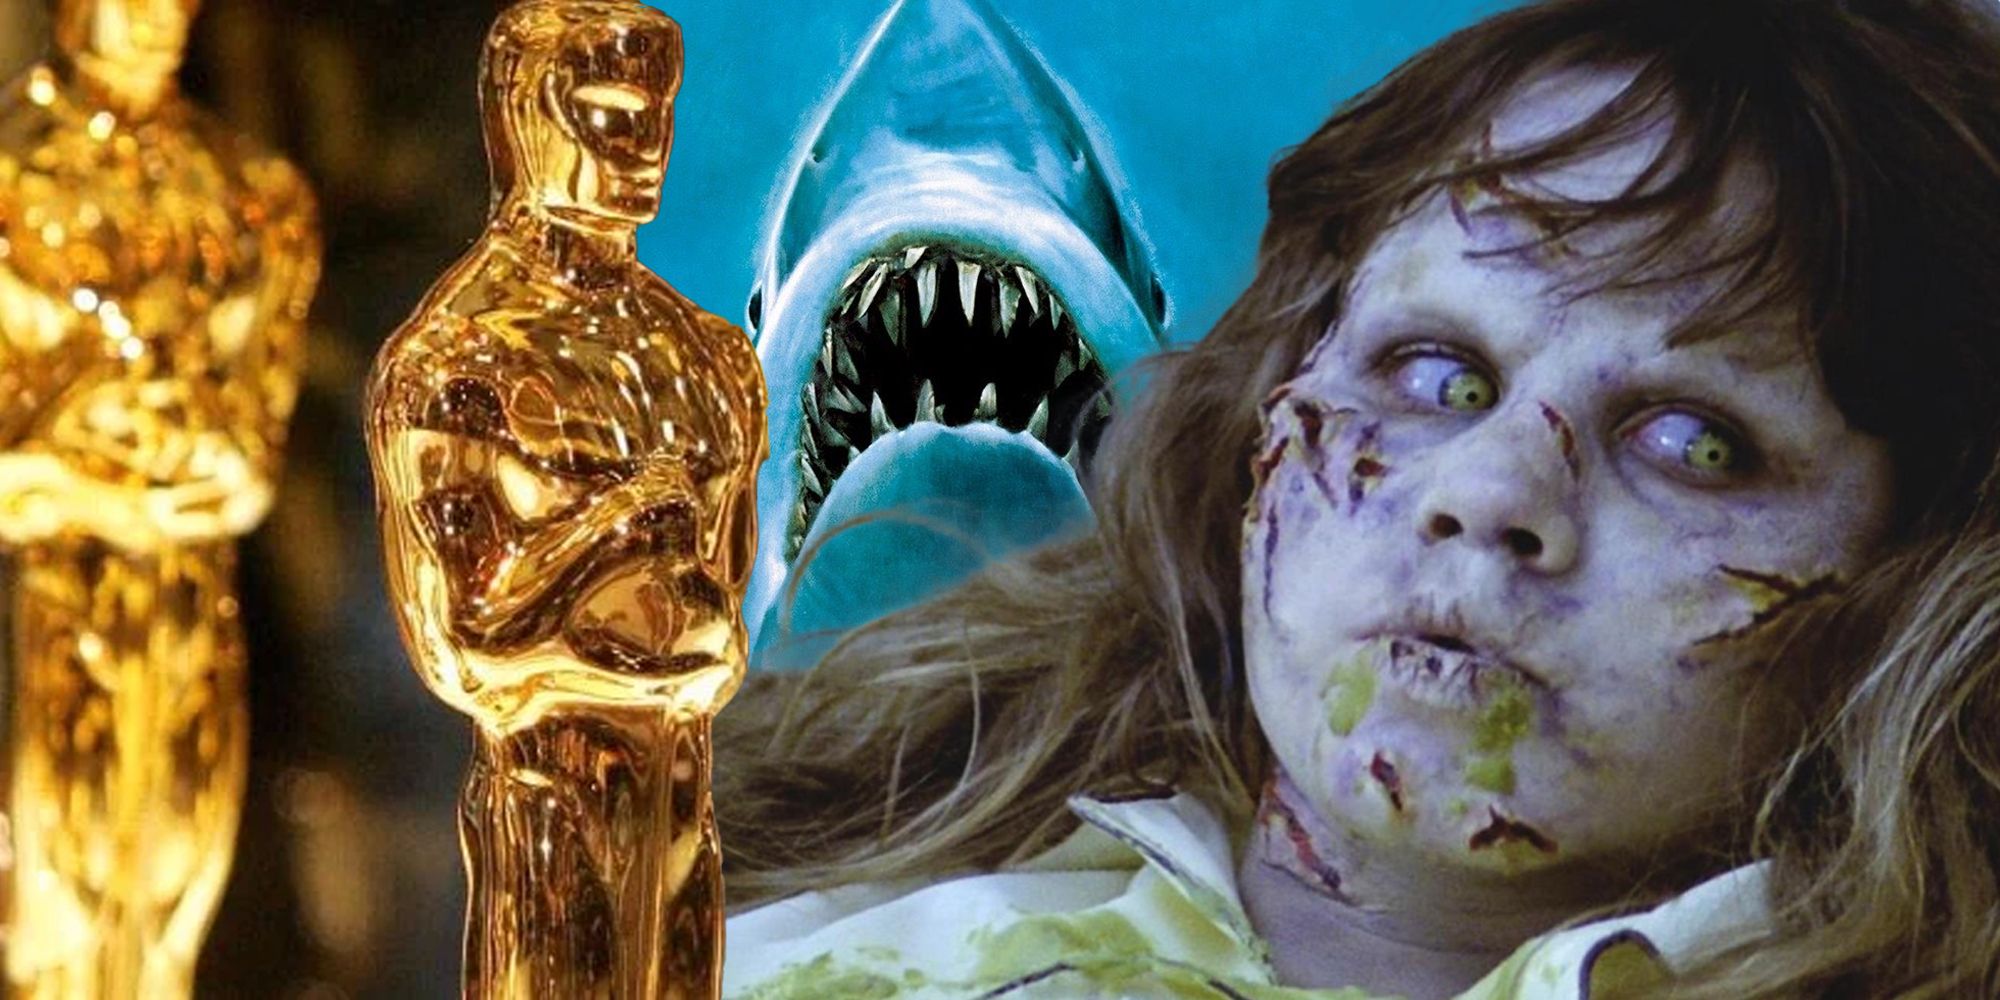 Best Picture Nominees The Exorcist and Jaws.